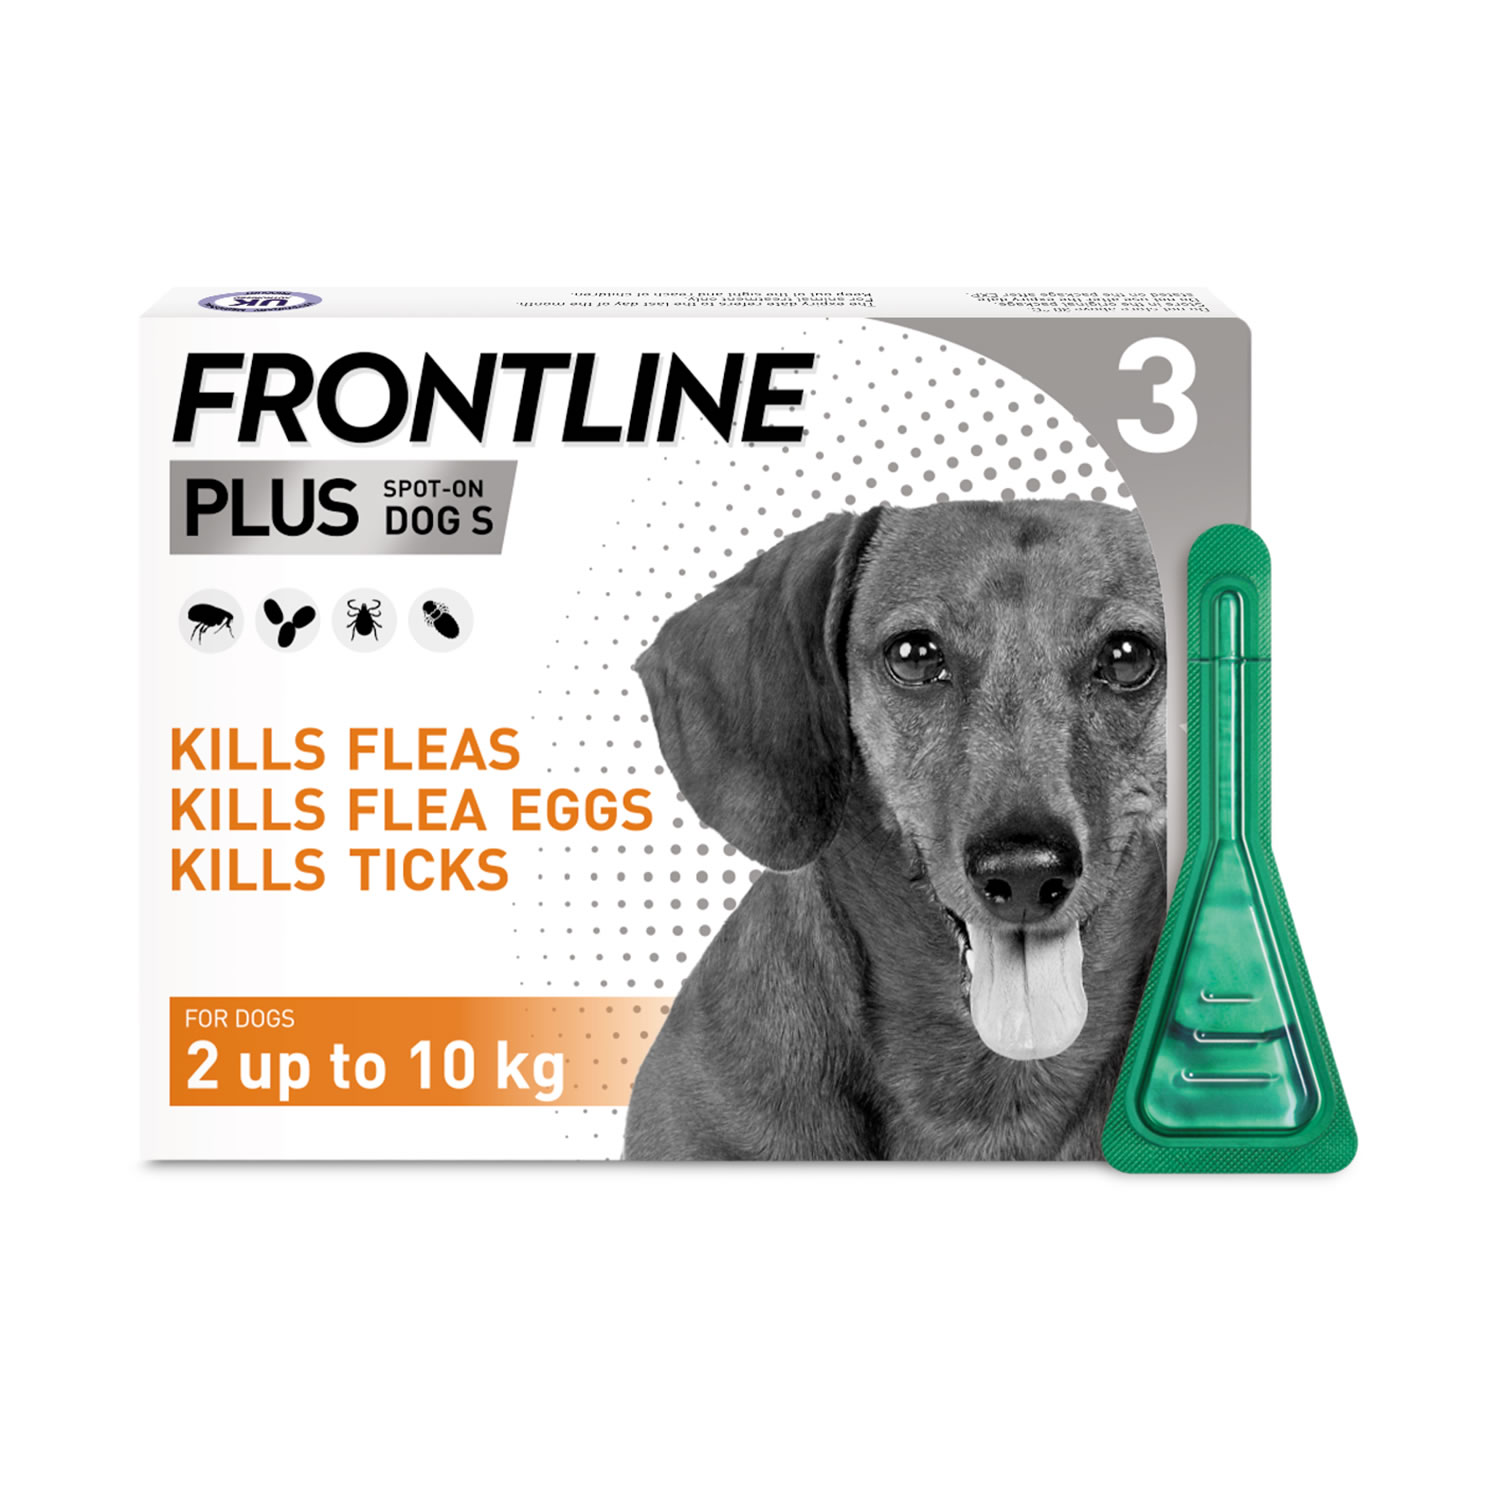 FRONTLINE PLUS SPOT ON FOR SMALL DOGS 2-10KG 3 PIPETTES 2 - 10 KG X 3 PIPETTES